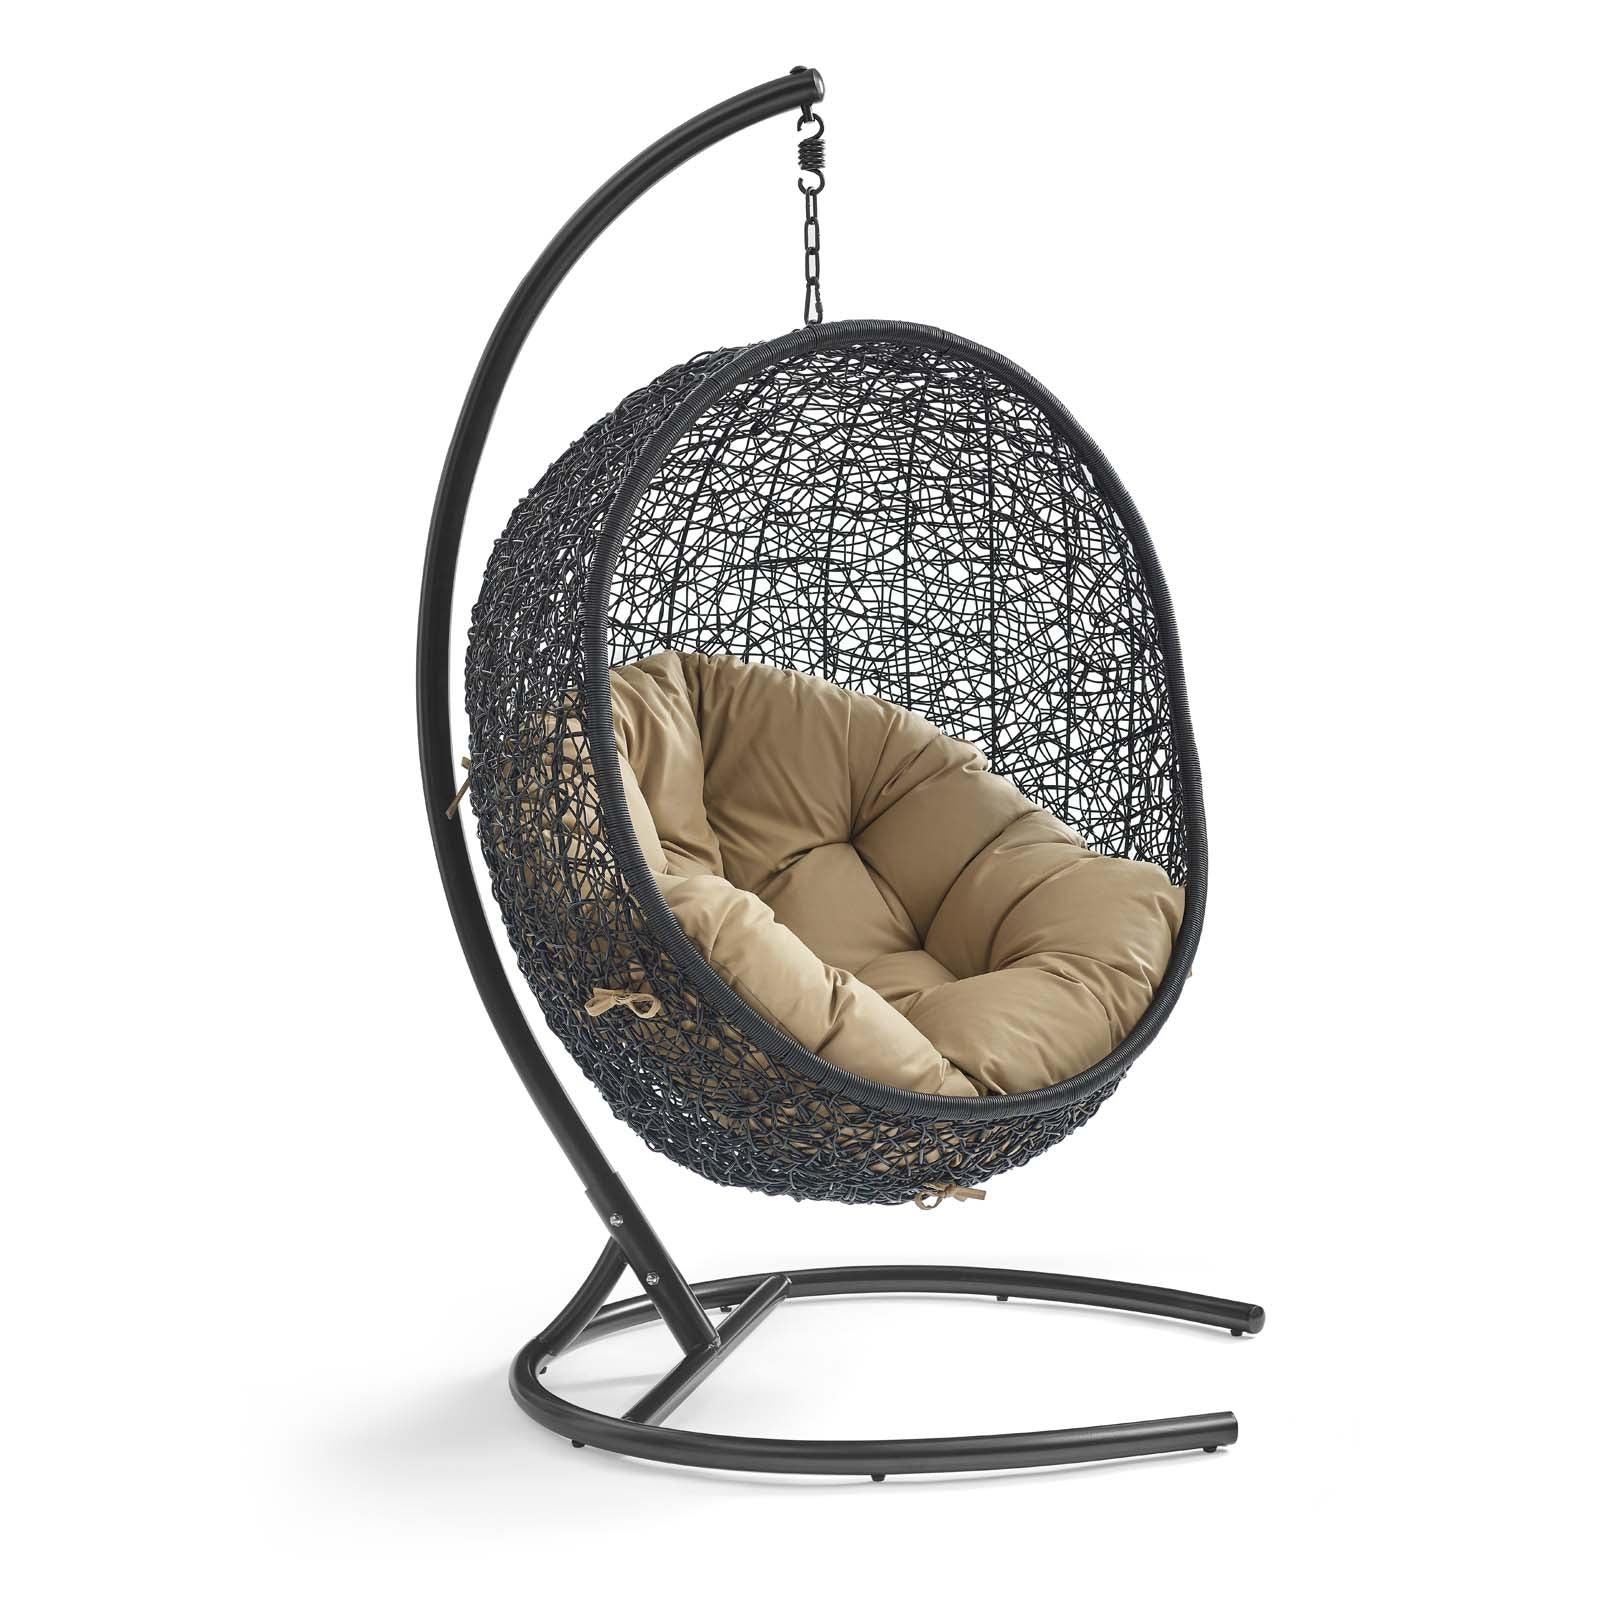 Modway Encase Swing Outdoor Patio Lounge Chair FredCo